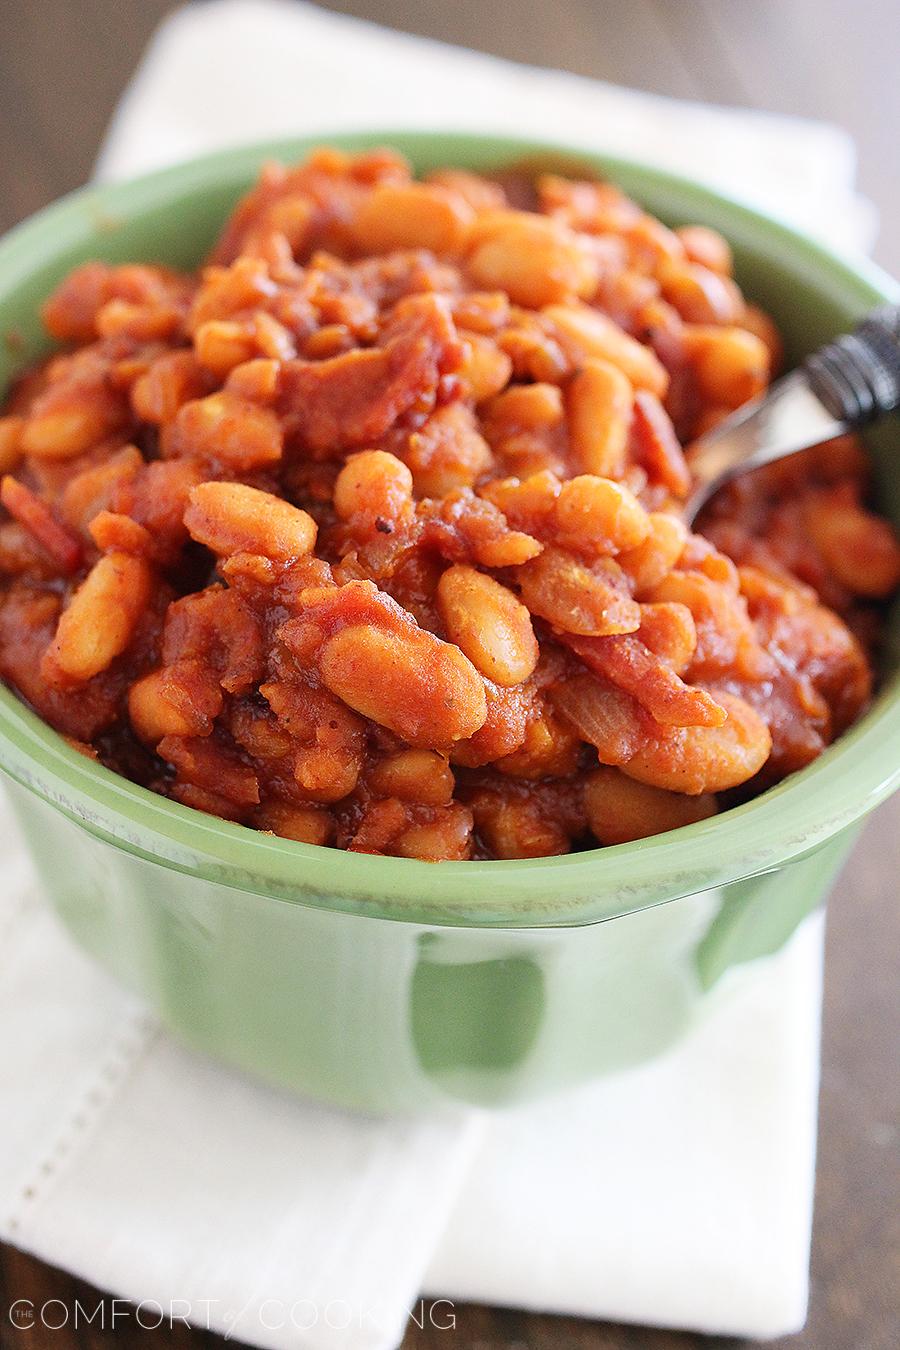 Easy Maple-Bourbon BBQ Baked Beans – These sweet, smoky 30-minute baked beans with bacon, bourbon and maple are the perfect addition to your BBQ plate! | thecomfortofcooking.com